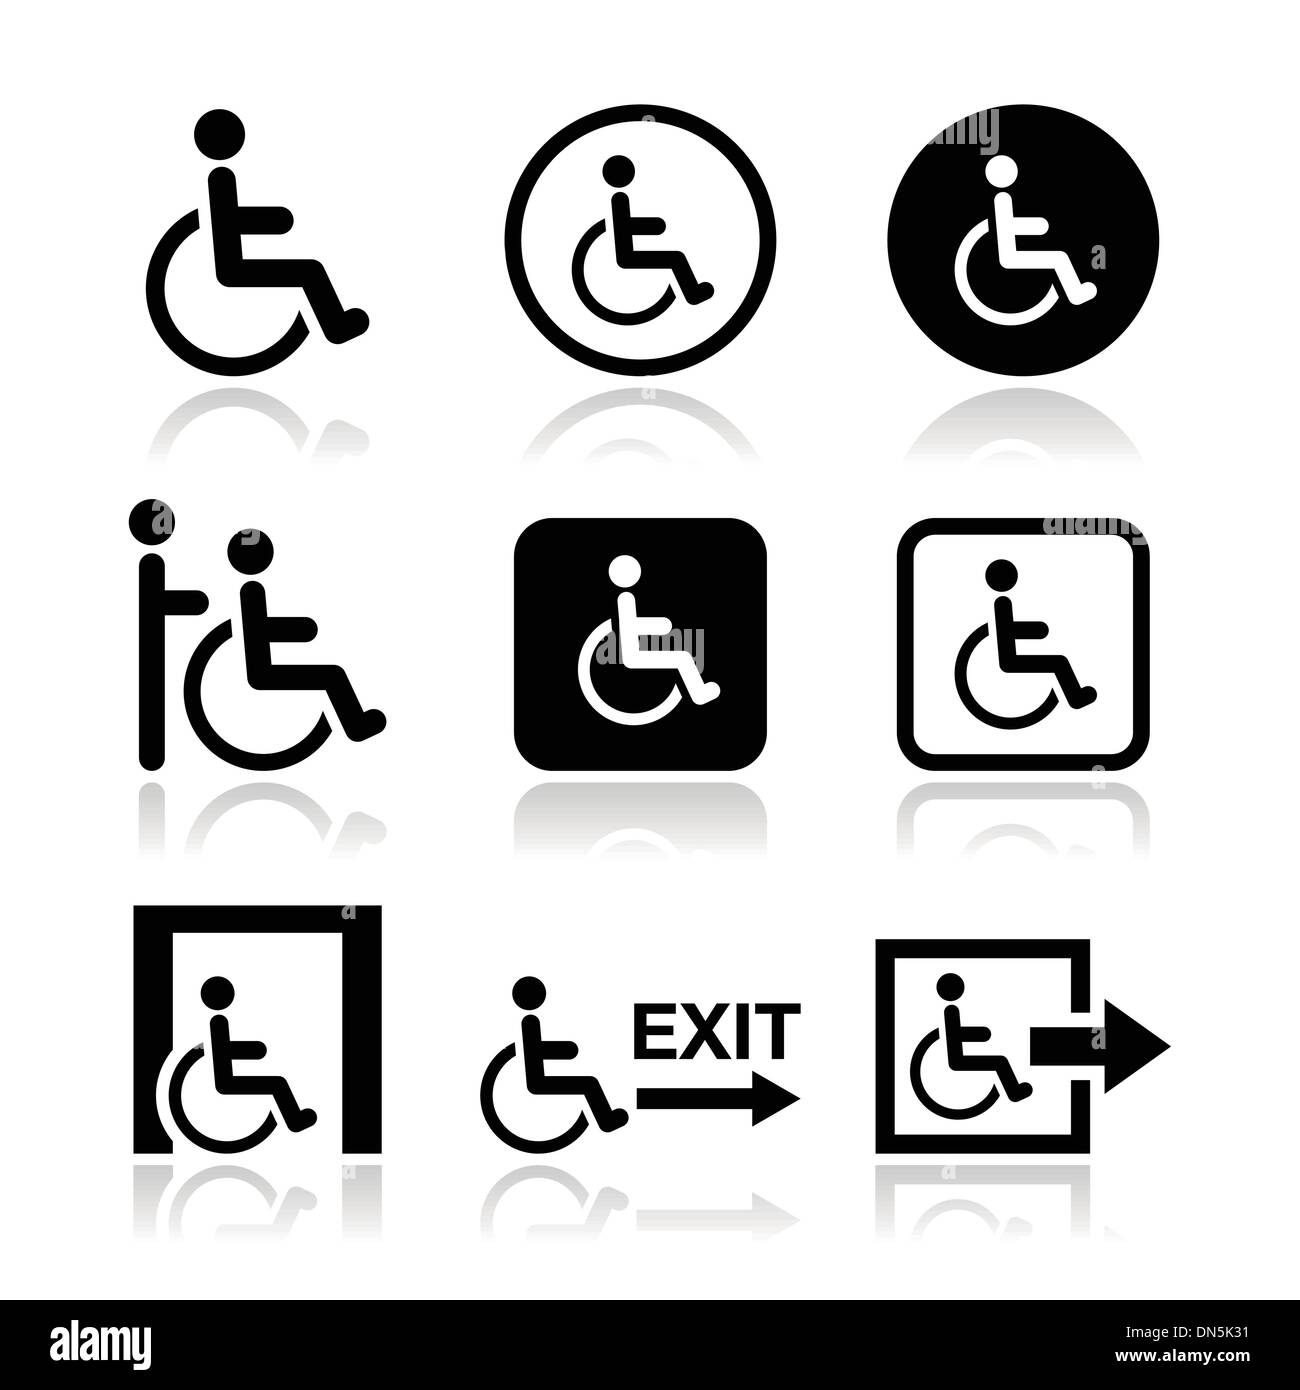 Man on wheelchair, disabled, emergency exit icon Stock Vector